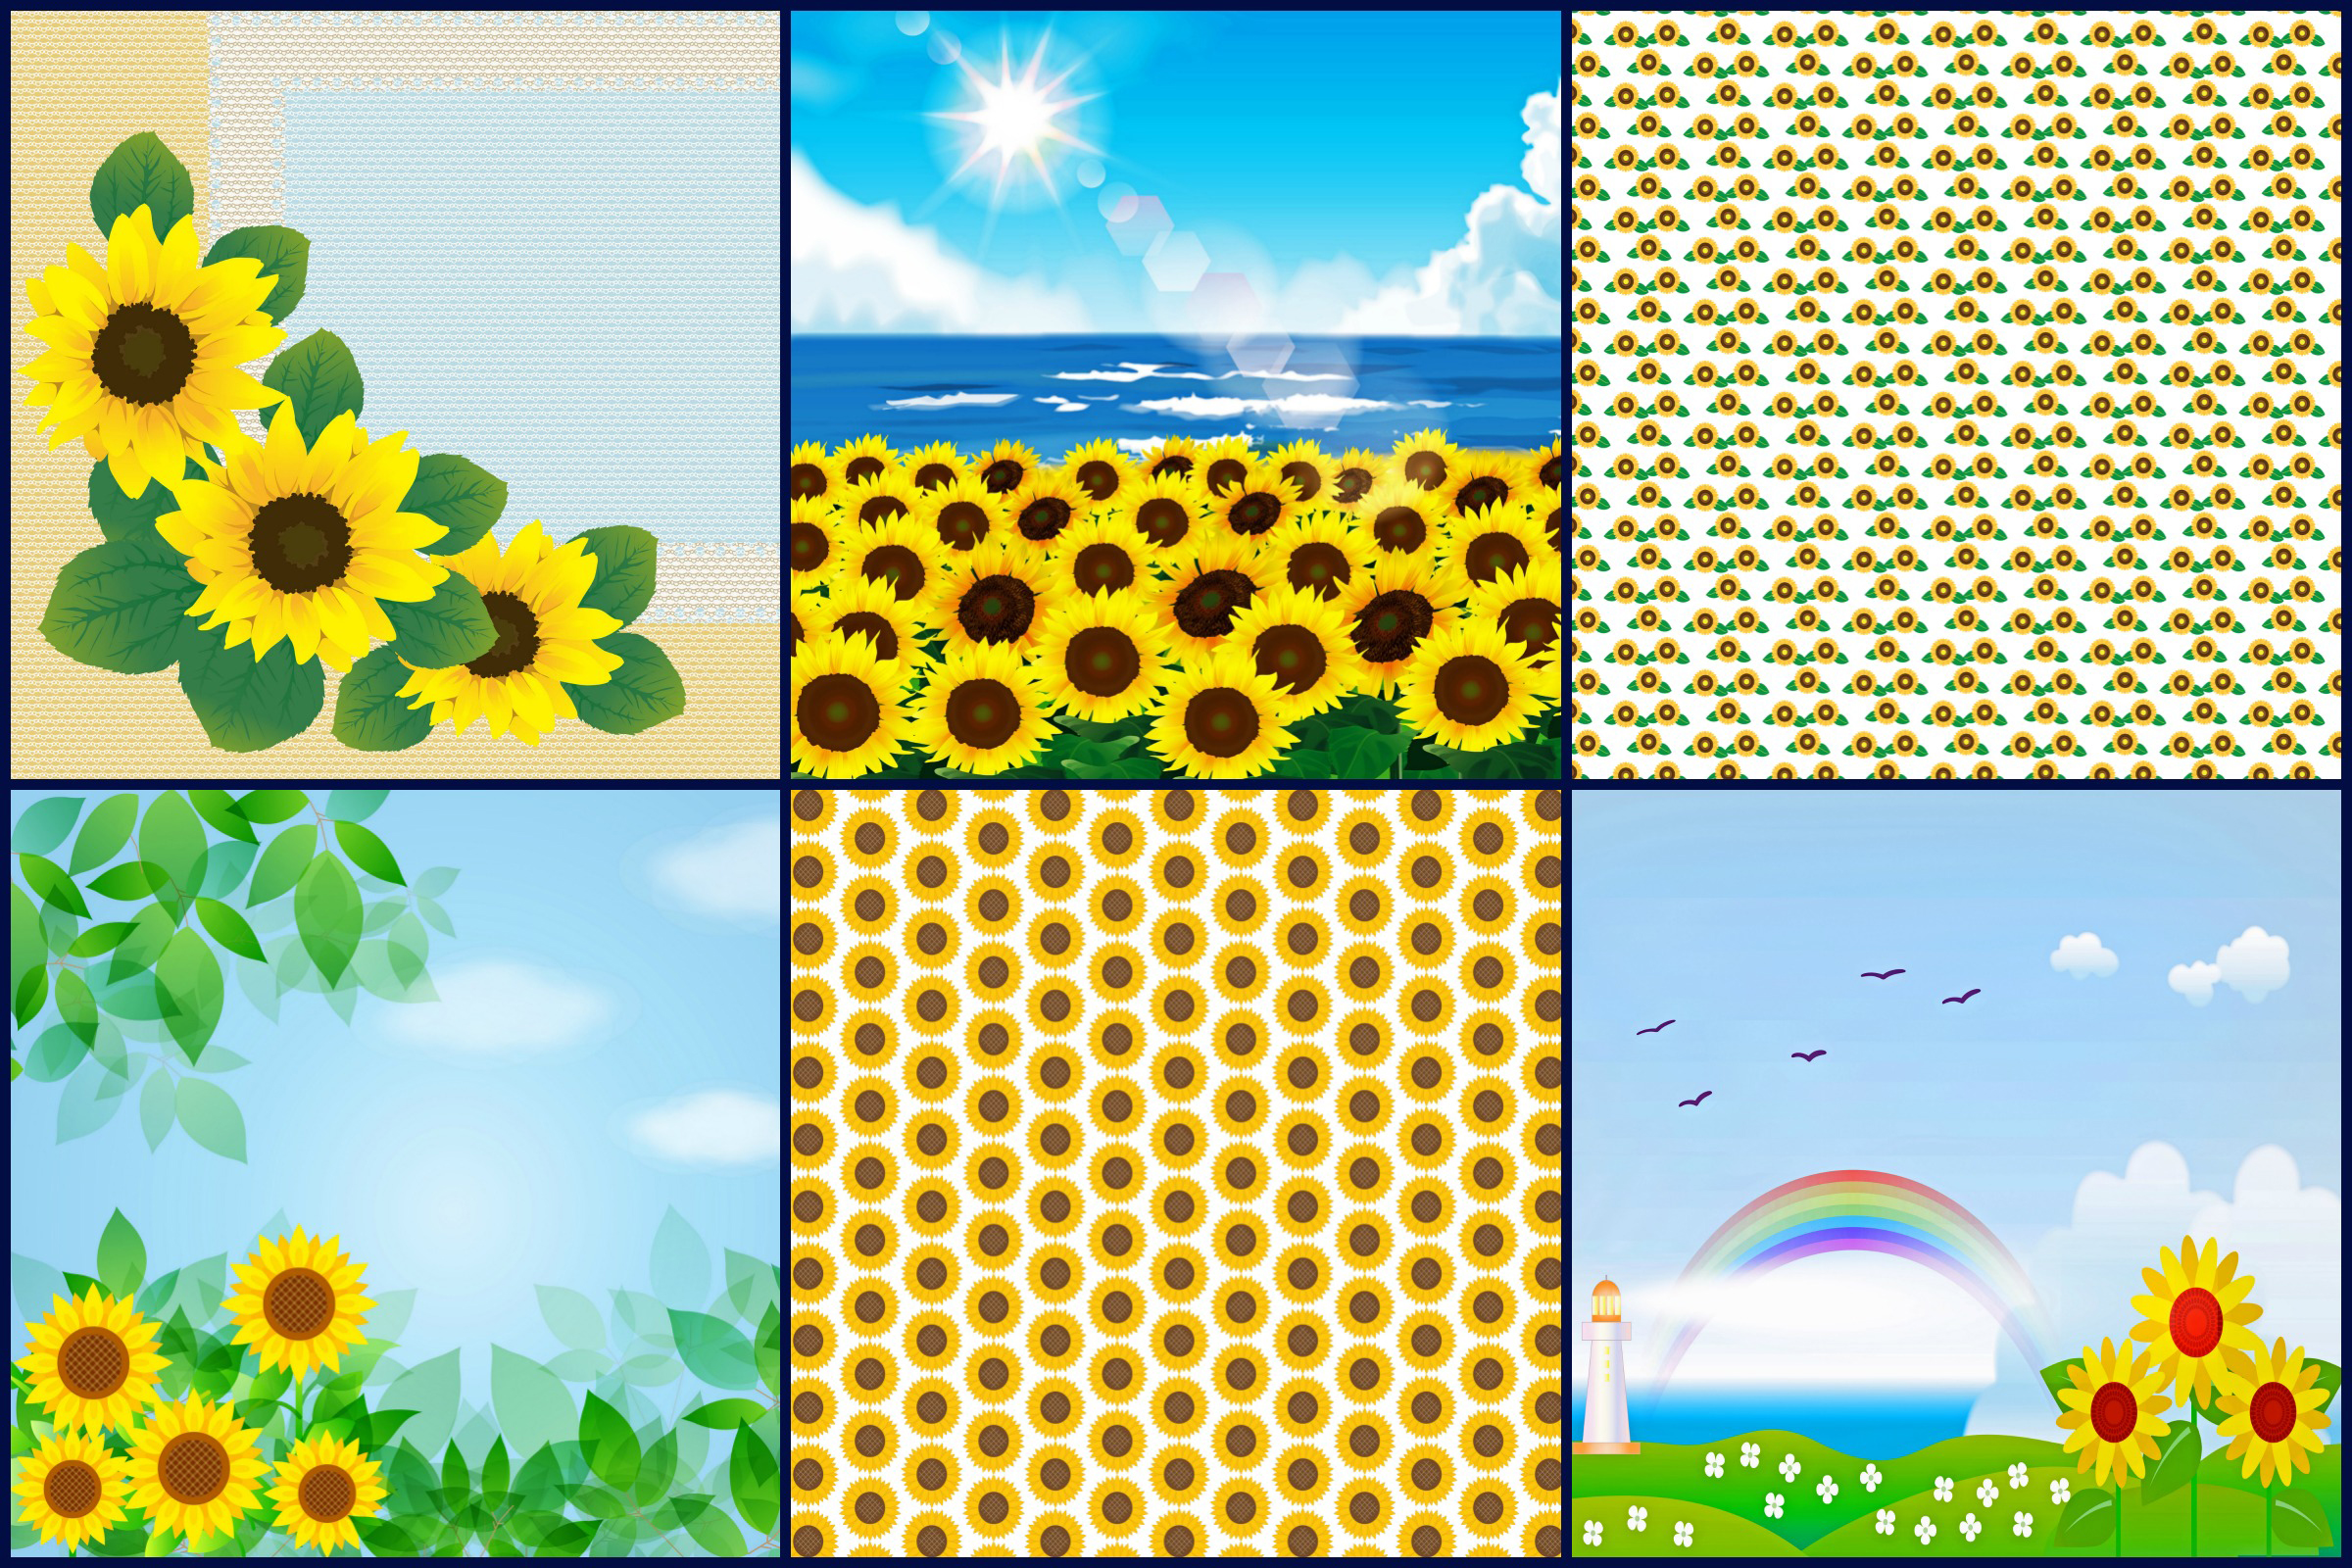 Download Sunflower Patterned & Scenery Digital Papers